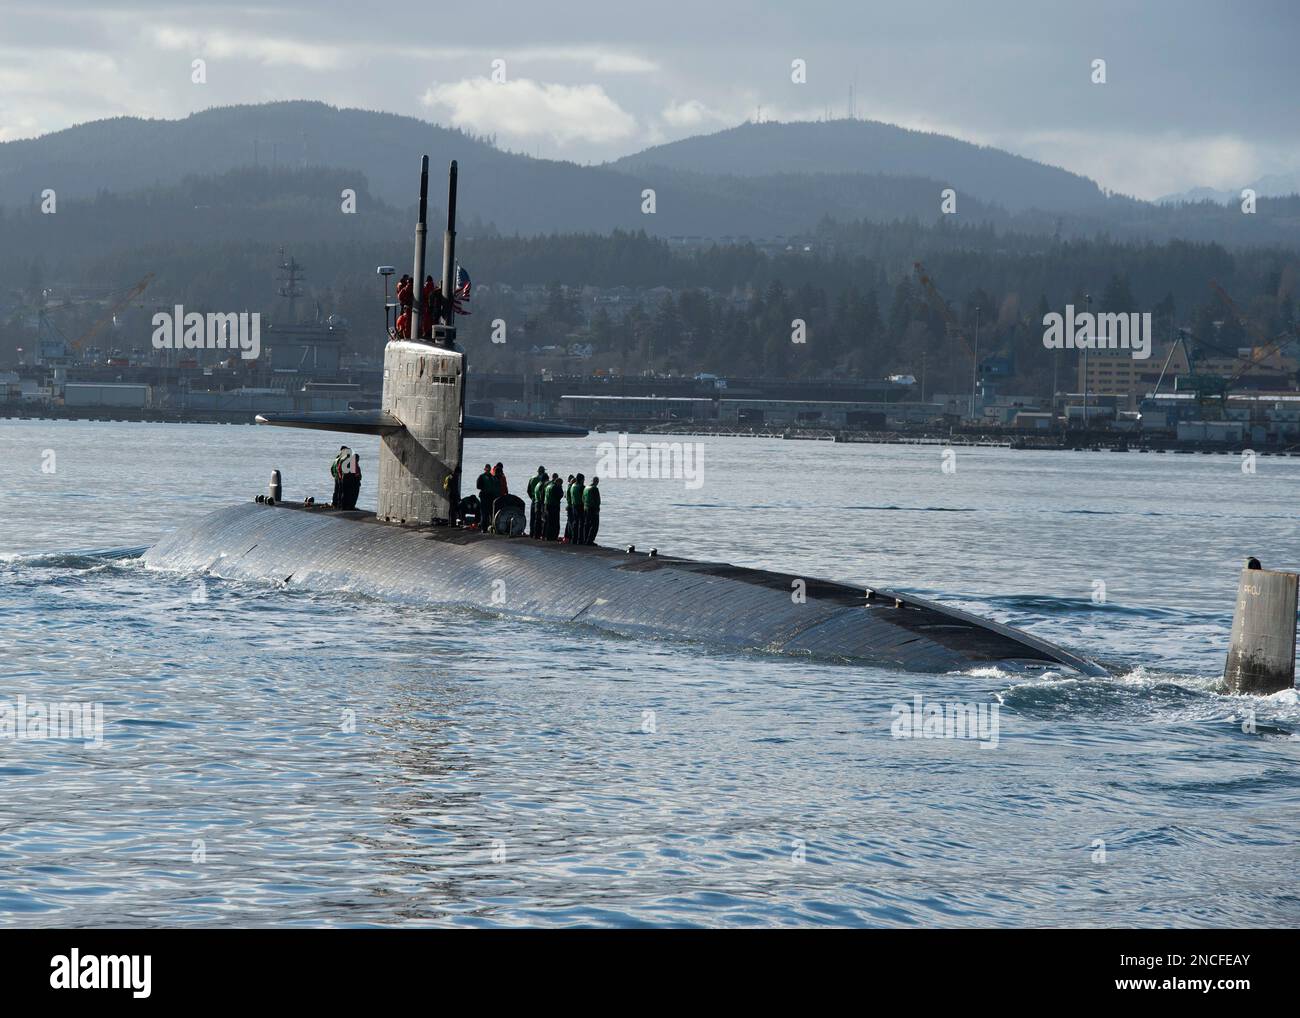 230210-N-ED185-1338  PUGET SOUND, Wash. (Feb. 10, 2023) The Los Angeles-class fast-attack submarine USS Key West (SSN 722) transits the Puget Sound before mooring at Naval Base Kitsap – Bremerton, Washington, February 10, 2023. Measuring more than 360 feet long and weighing more than 6,900 tons when submerged, Key West supports a multitude of missions to include anti-submarine warfare, anti-surface ship warfare, surveillance and reconnaissance, and strike warfare. (U.S. Navy Photo by Mass Communication Specialist 1st Class Brian. G. Reynolds) Stock Photo